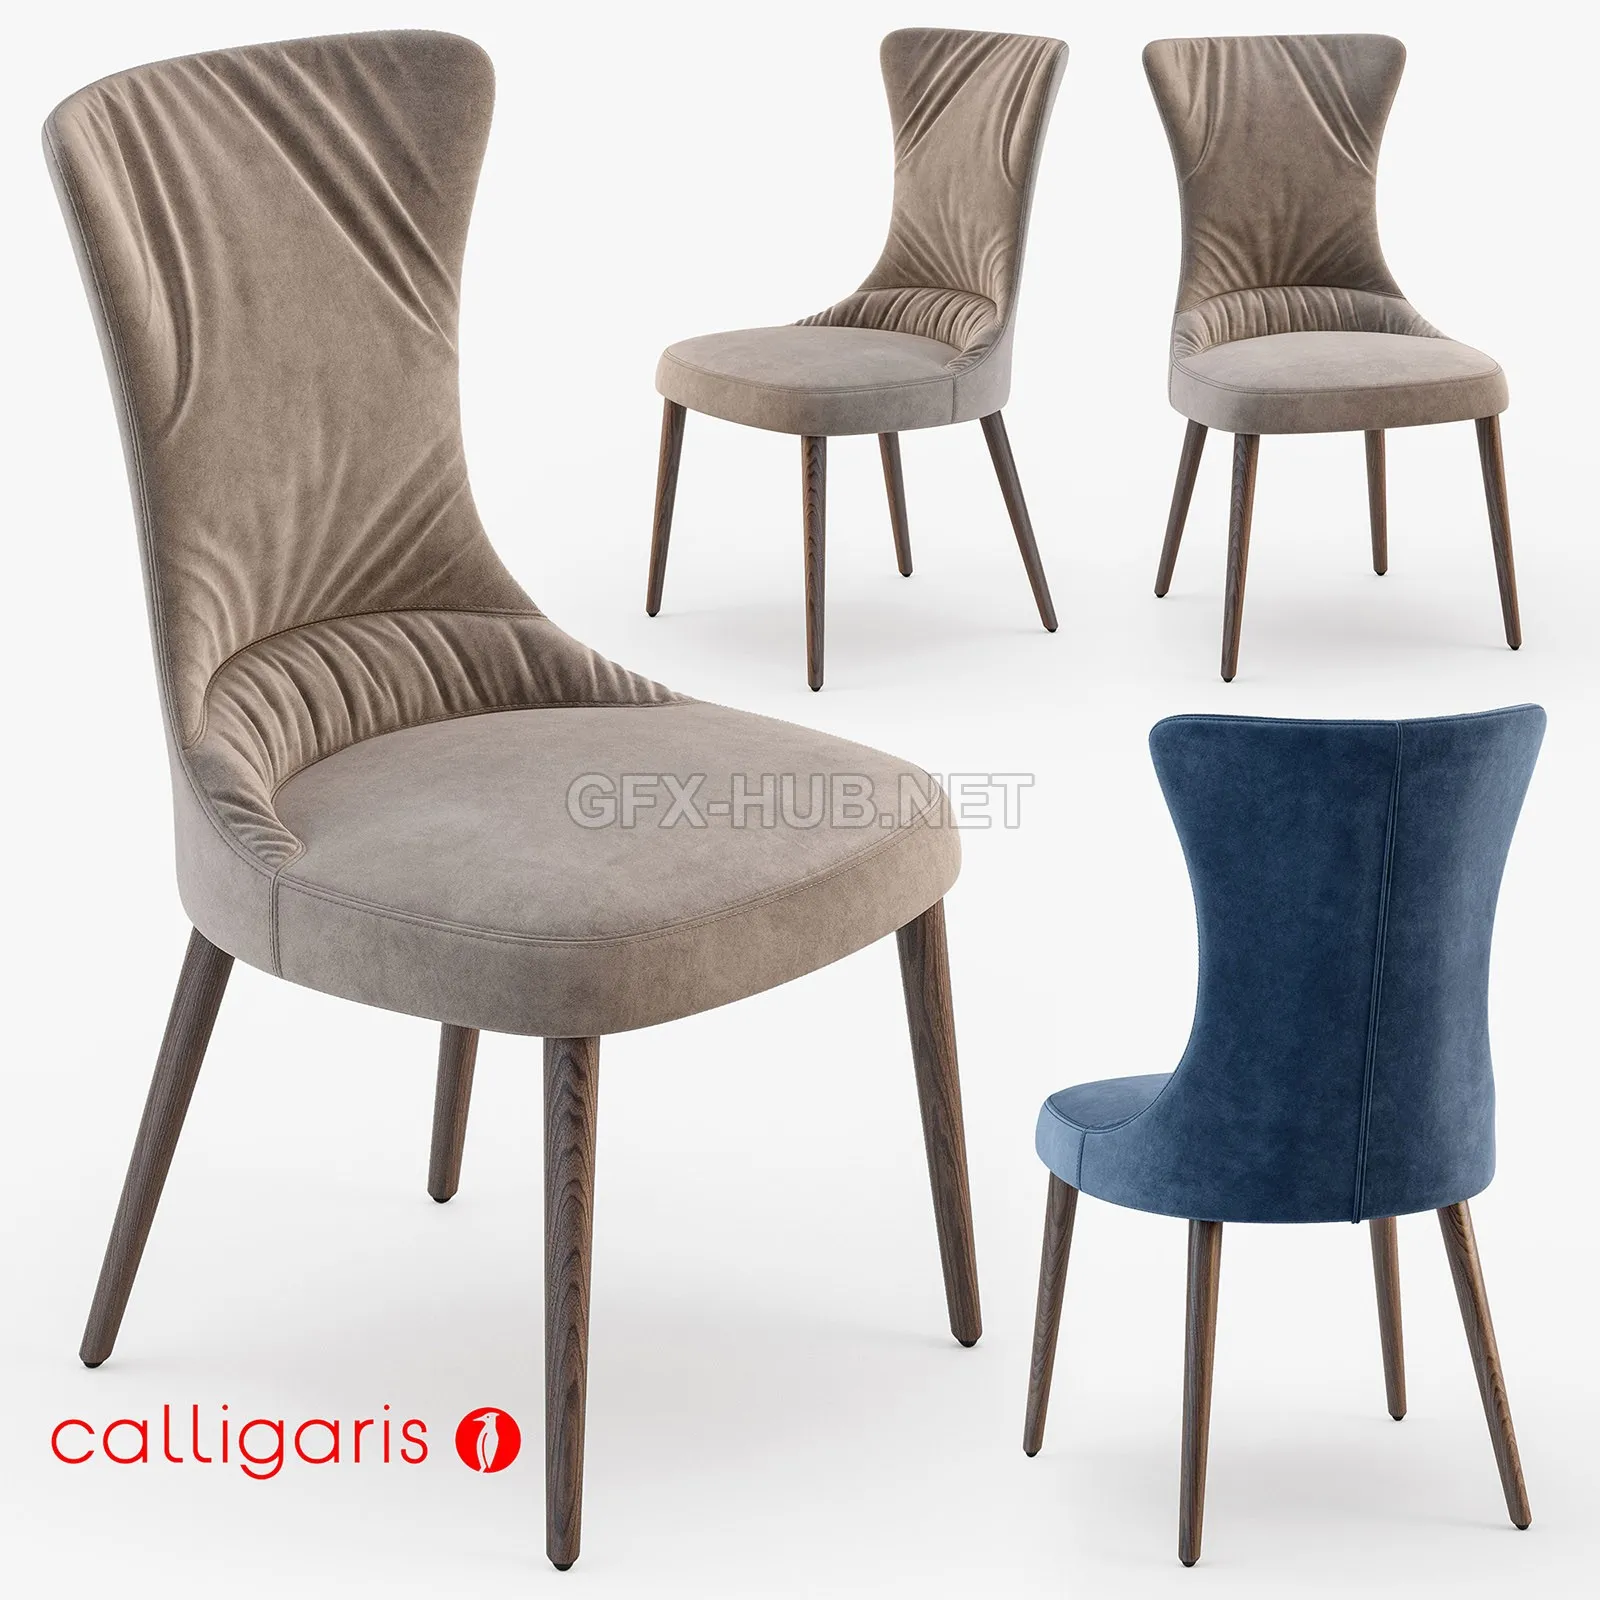 FURNITURE 3D MODELS – Calligaris Rosemary chair